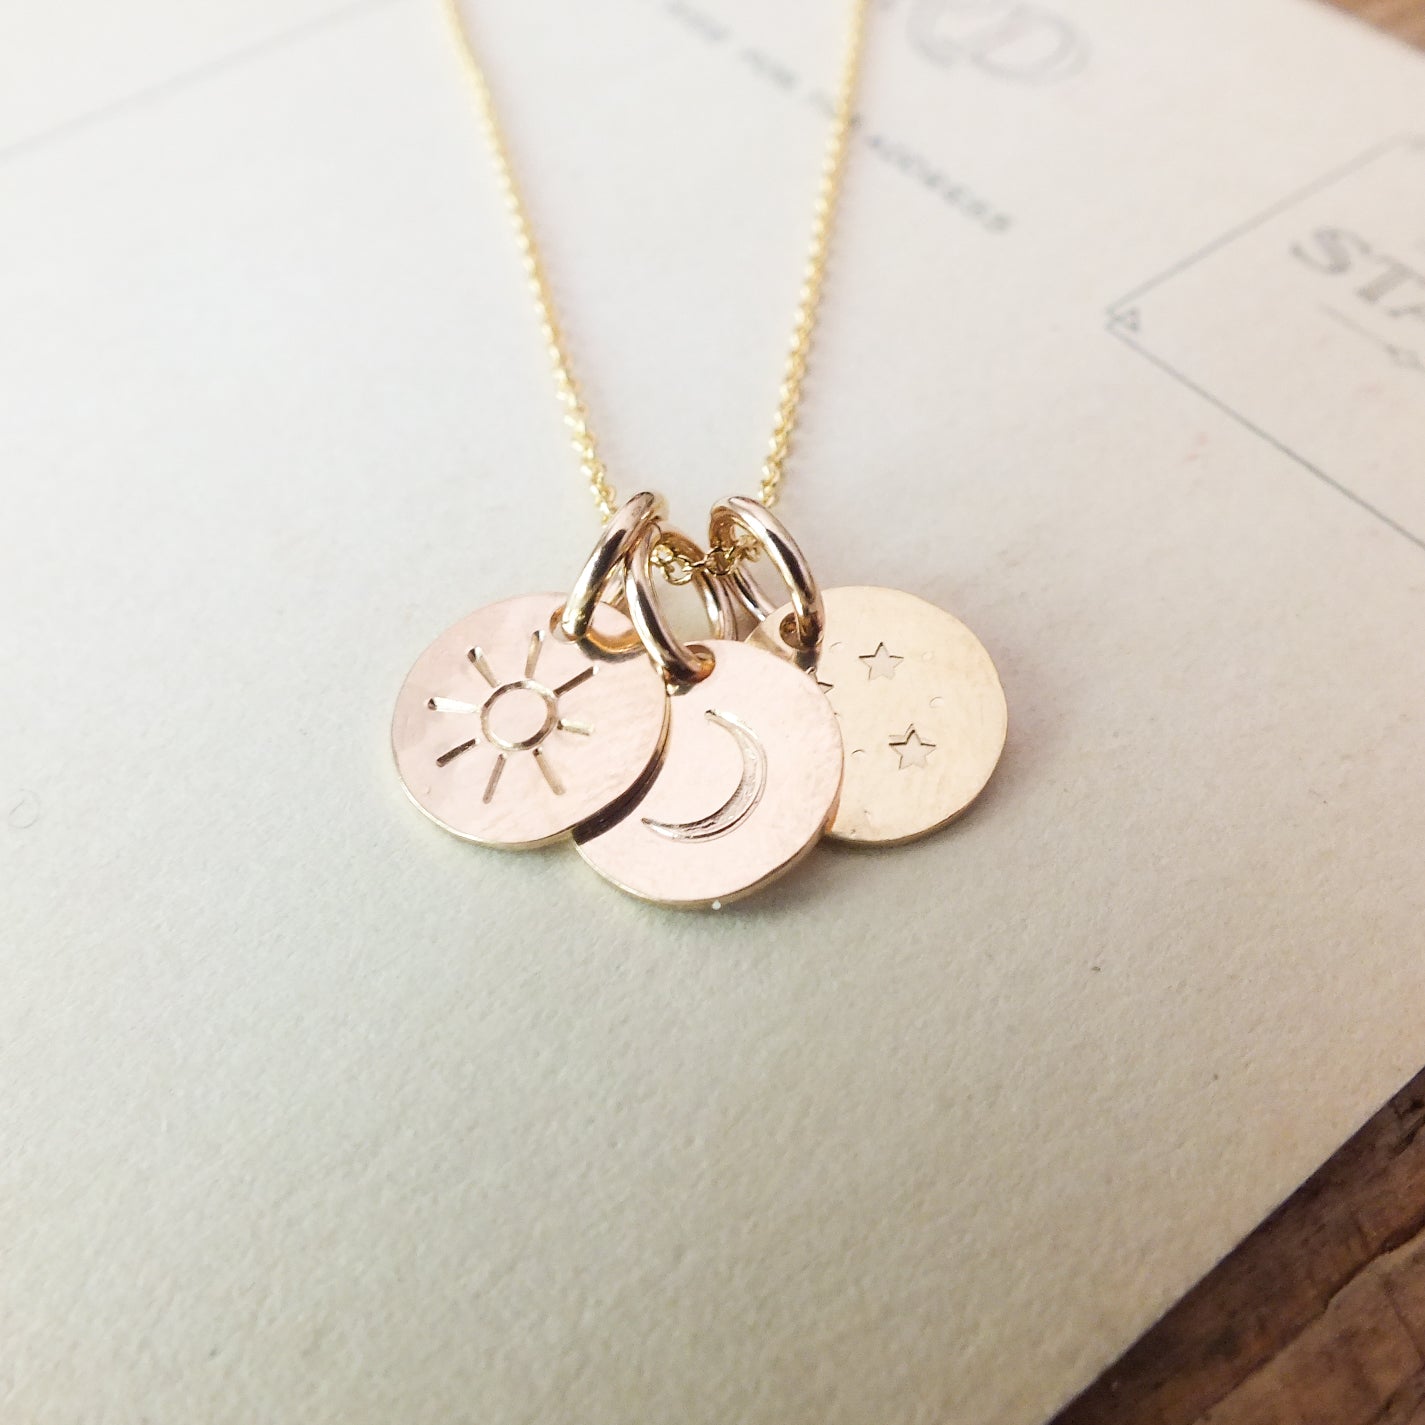 Becoming Jewelry's Gold-filled Sun Moon and Stars Necklace on wooden ...